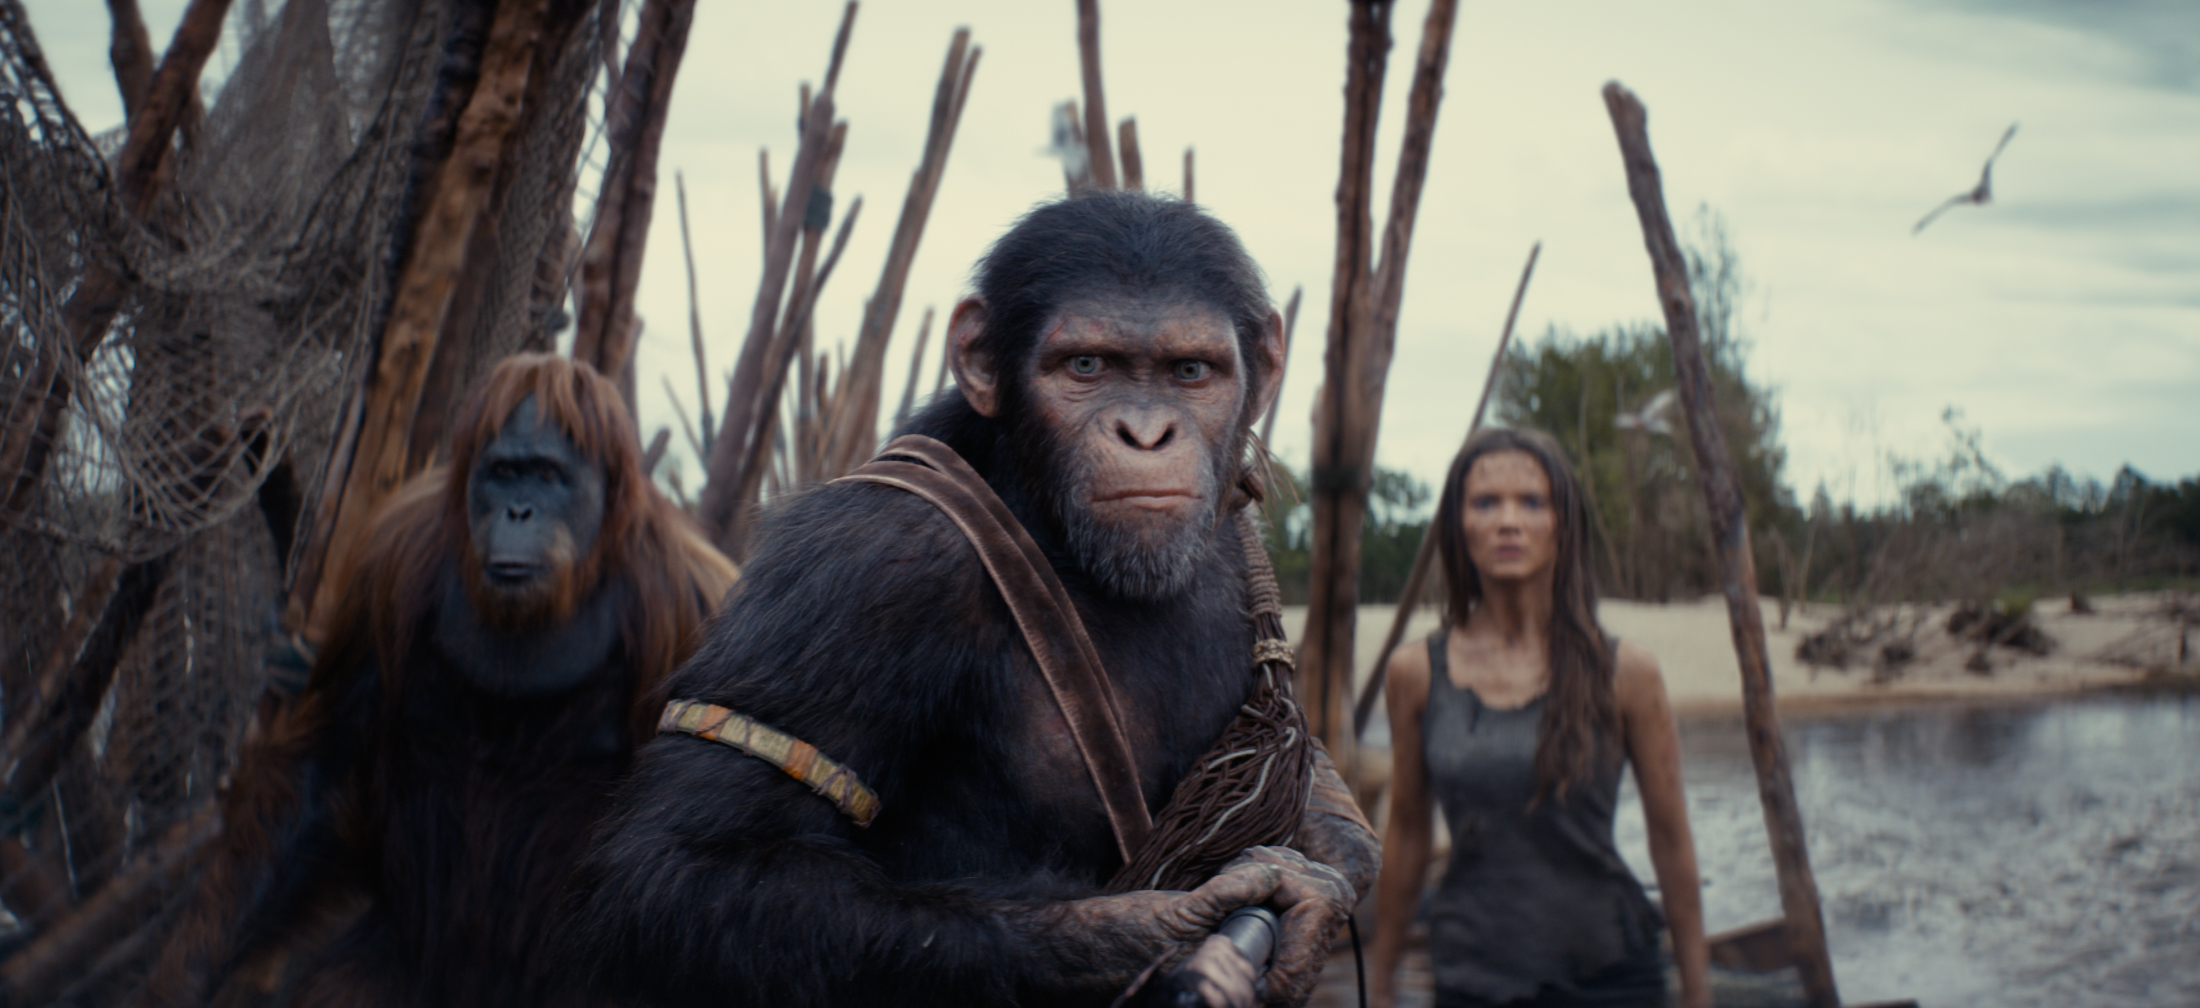 (L-R): Raka (played by Peter Macon), Noa (played by Owen Teague) , and Freya Allan as Nova in 20th Century Studios' KINGDOM OF THE PLANET OF THE APES. Photo courtesy of 20th Century Studios.